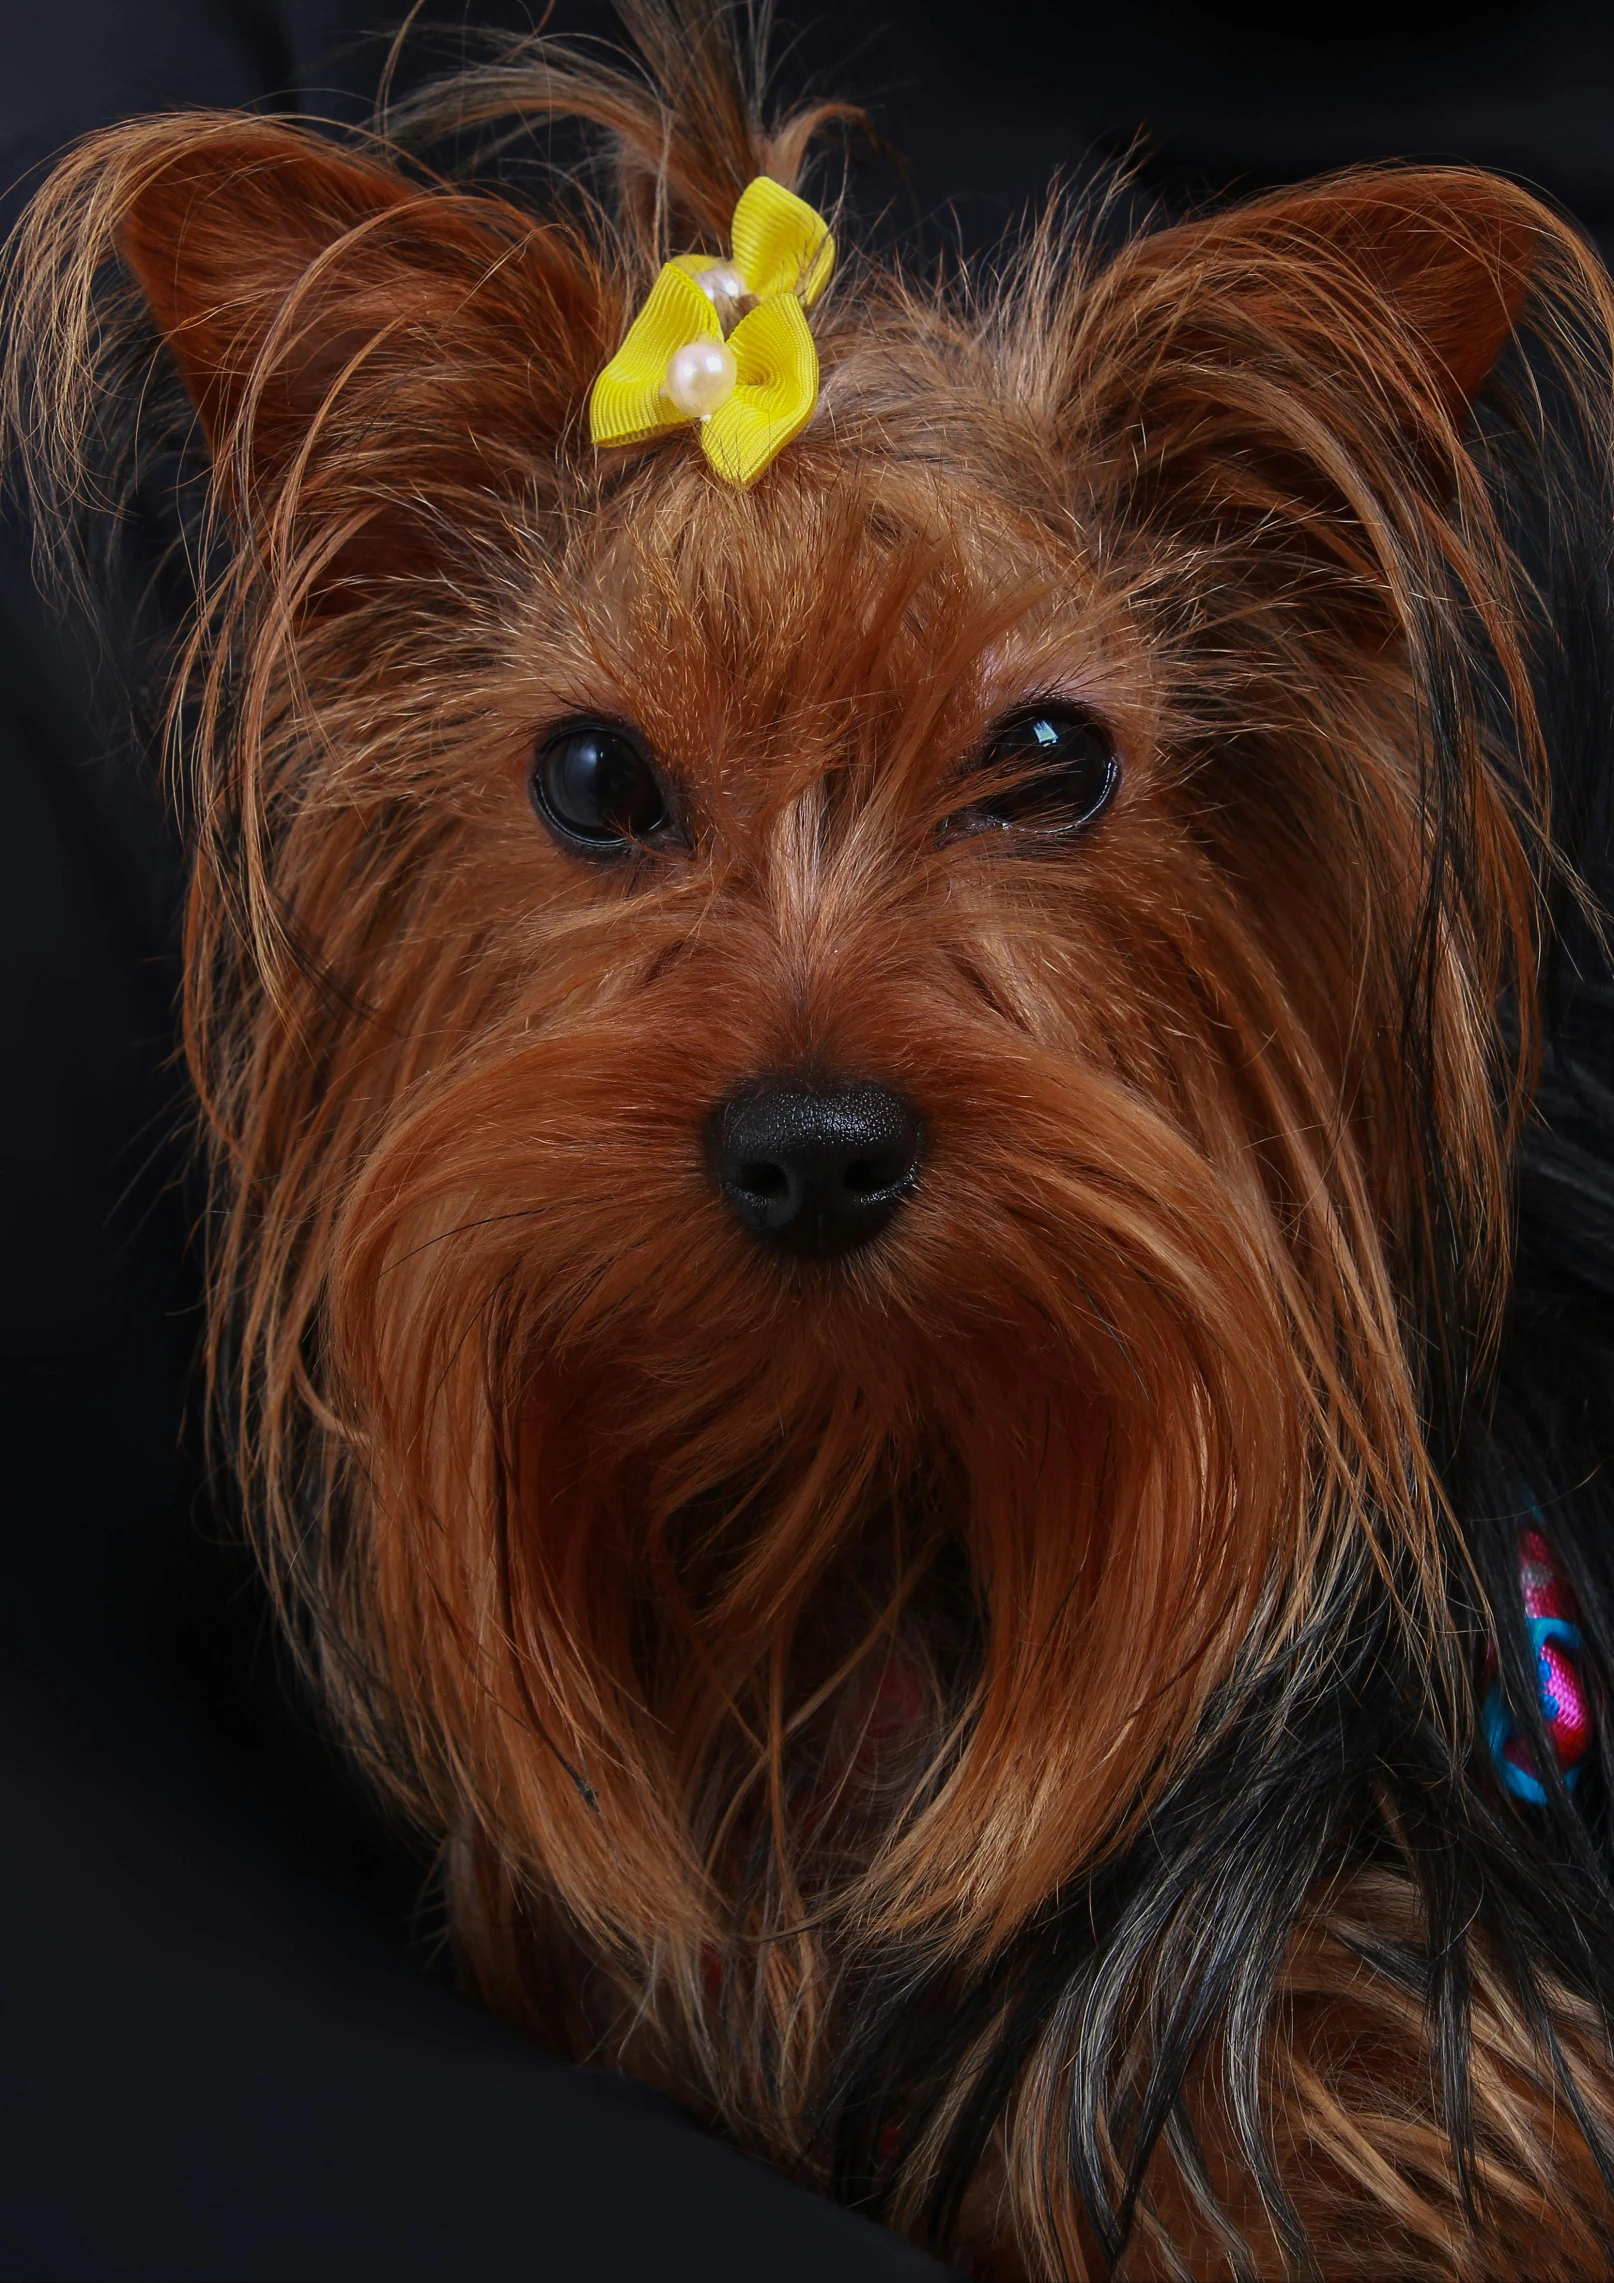 dog with a flower in its hair looking at the camera